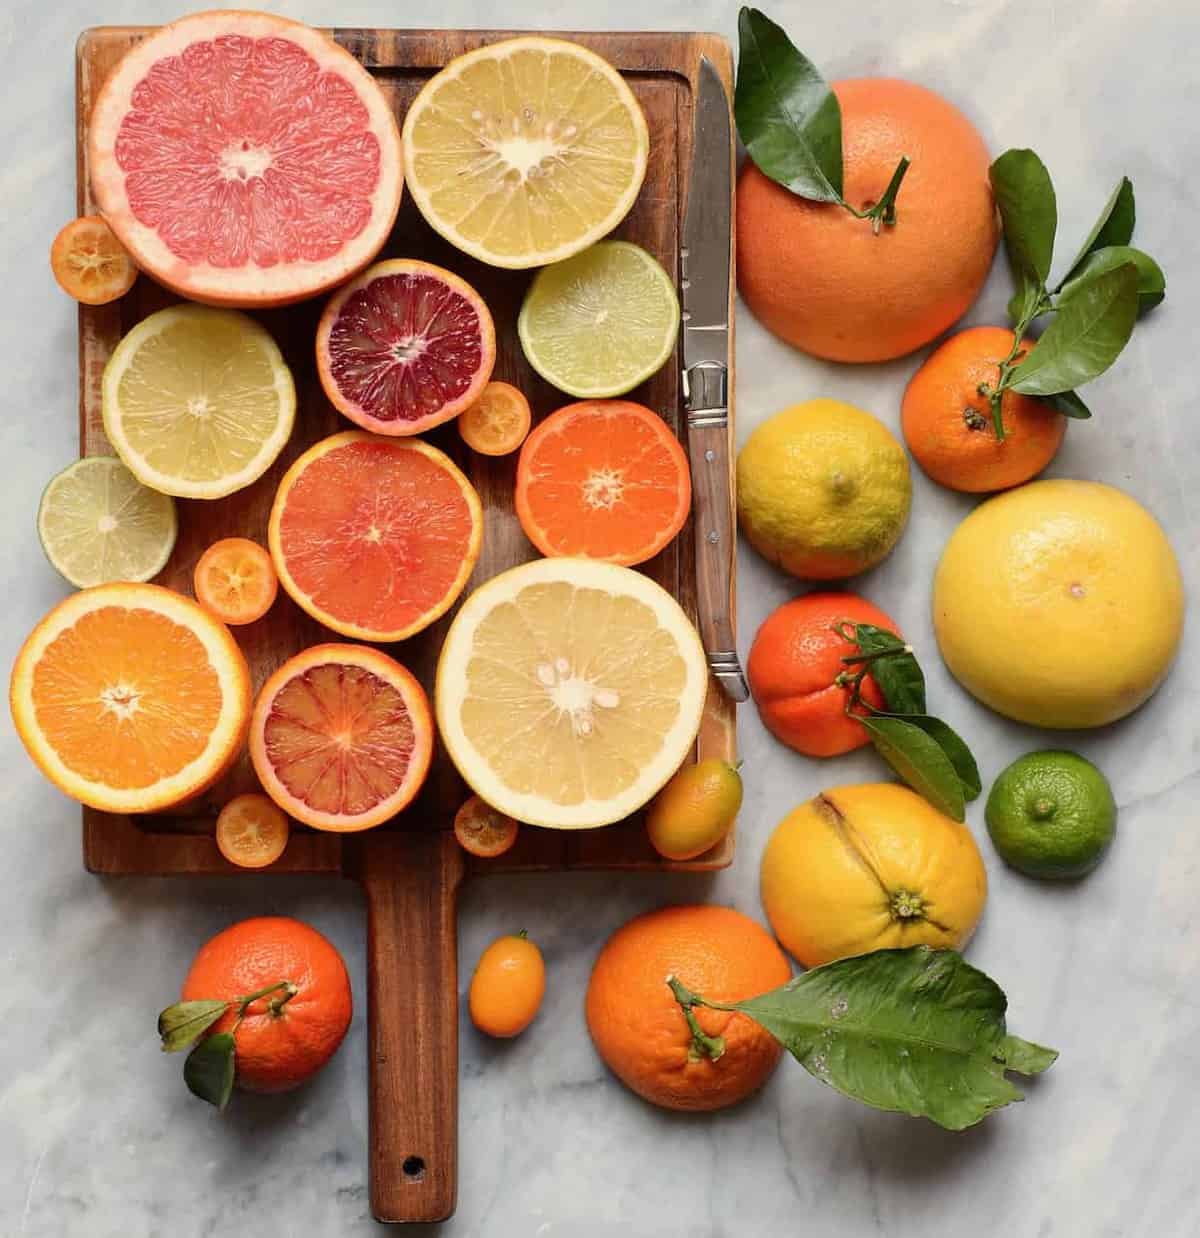 citrus fruits on a wooden board - a wonderful immune boosting foods selection